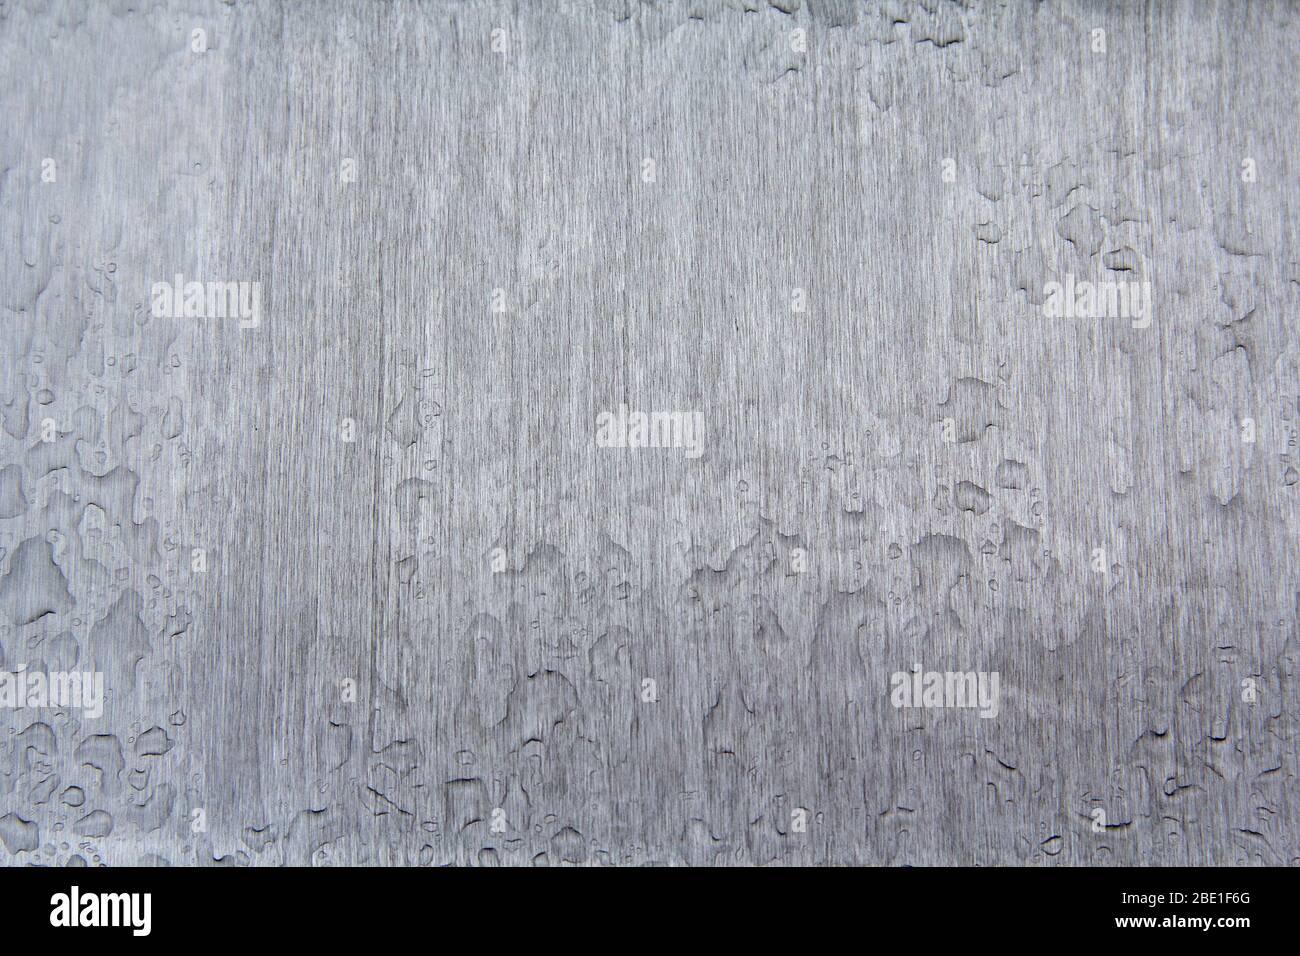 Rain drops on polished metal. Backgrounds and textures Stock Photo